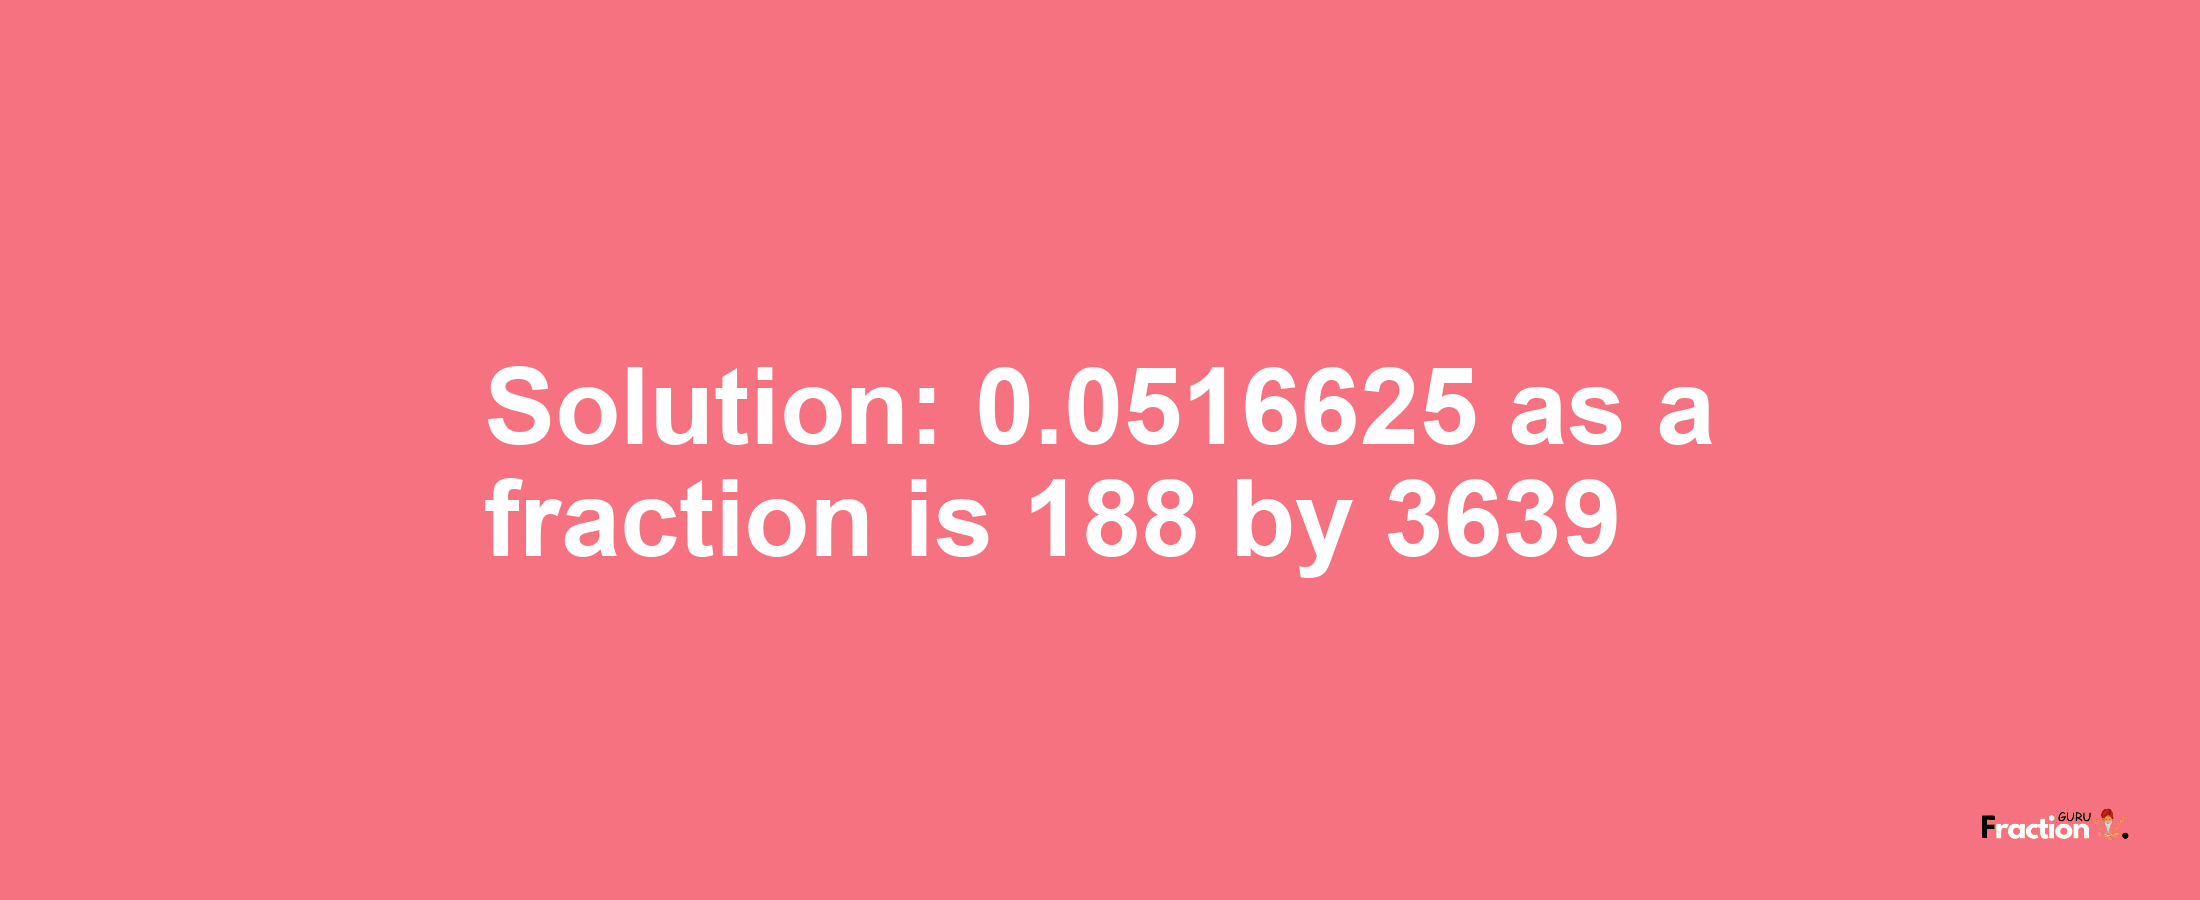 Solution:0.0516625 as a fraction is 188/3639